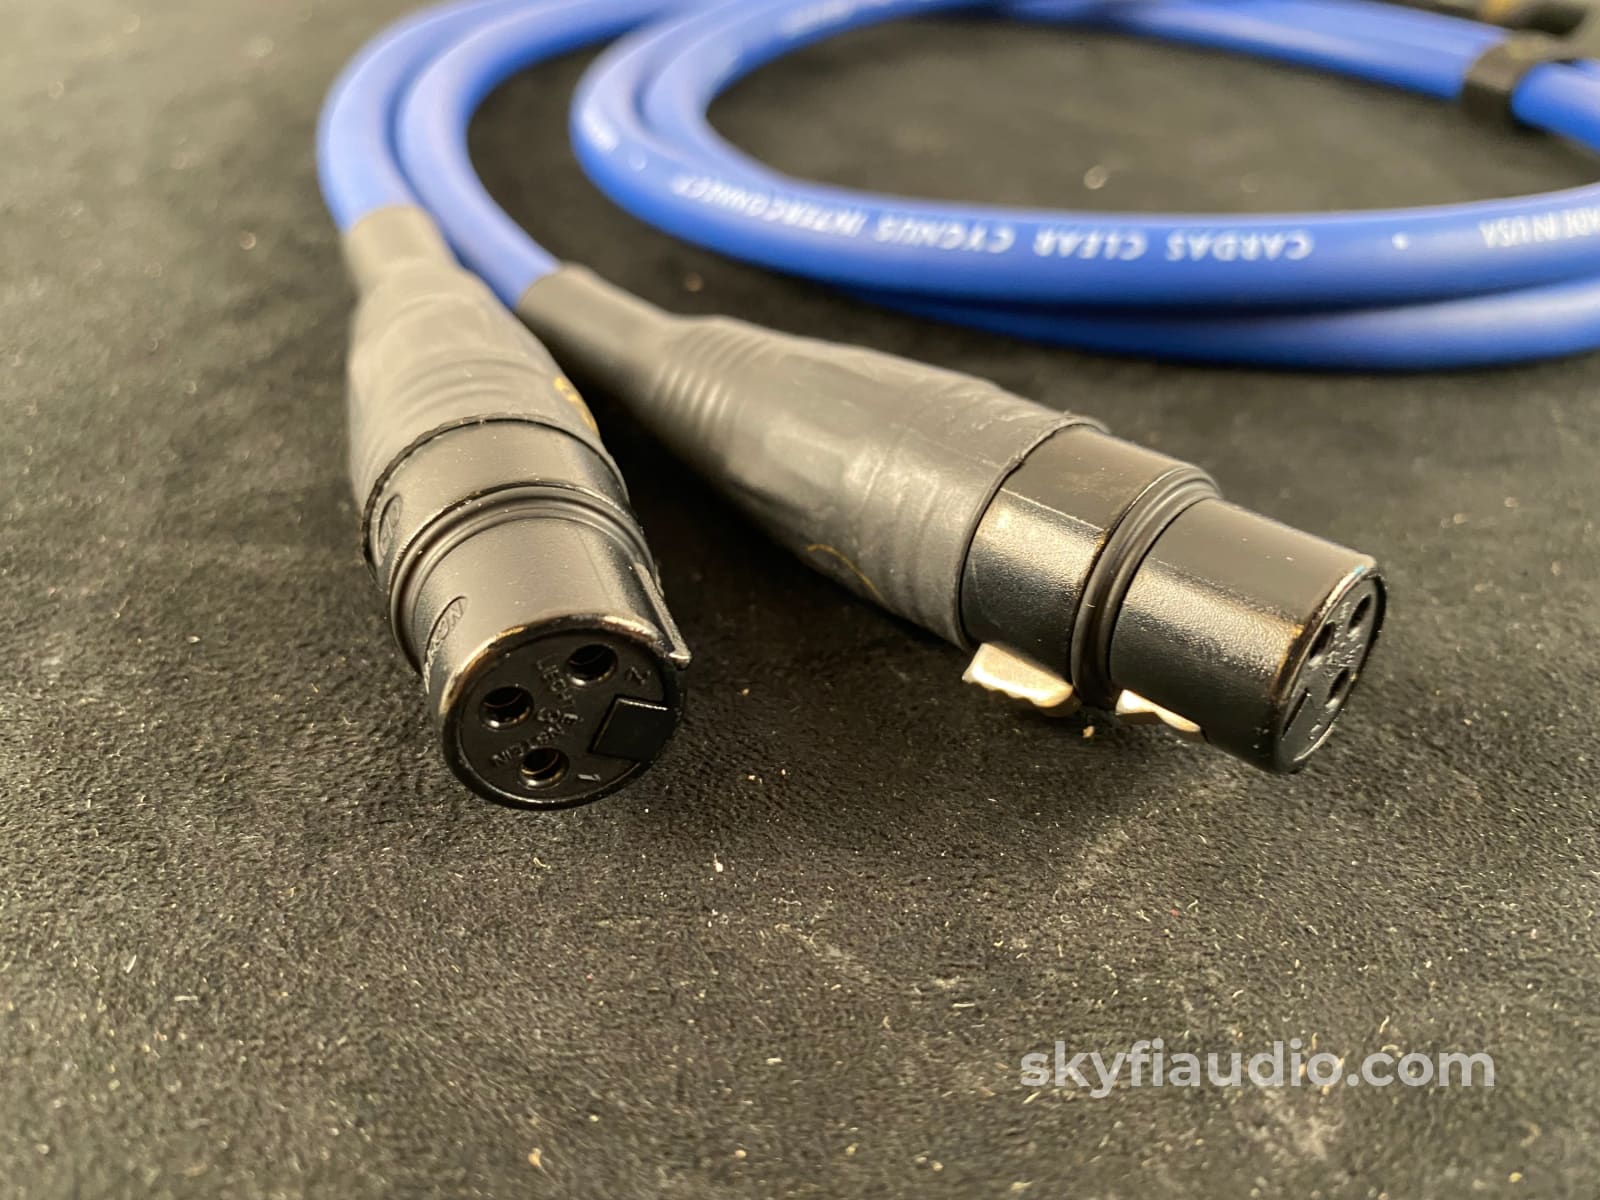 Cards Clear Cygnus Xlr Audio Interconnects 1 Meter (Pair) Cables